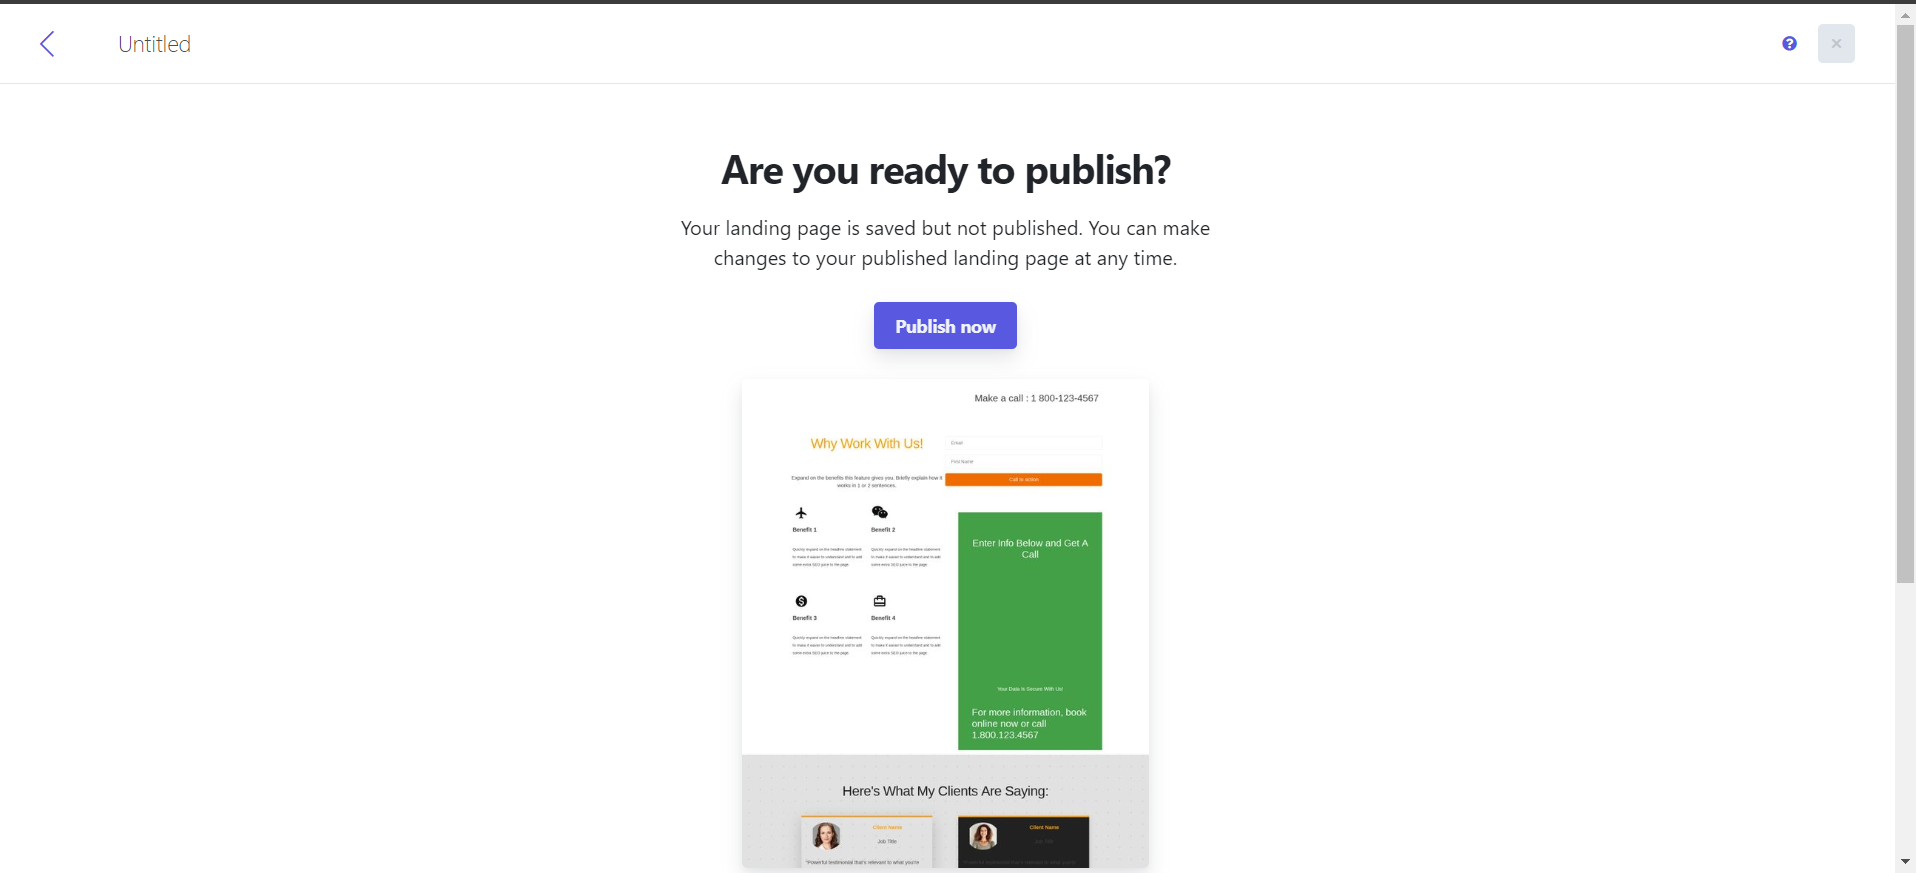 Launching Your Landing Page